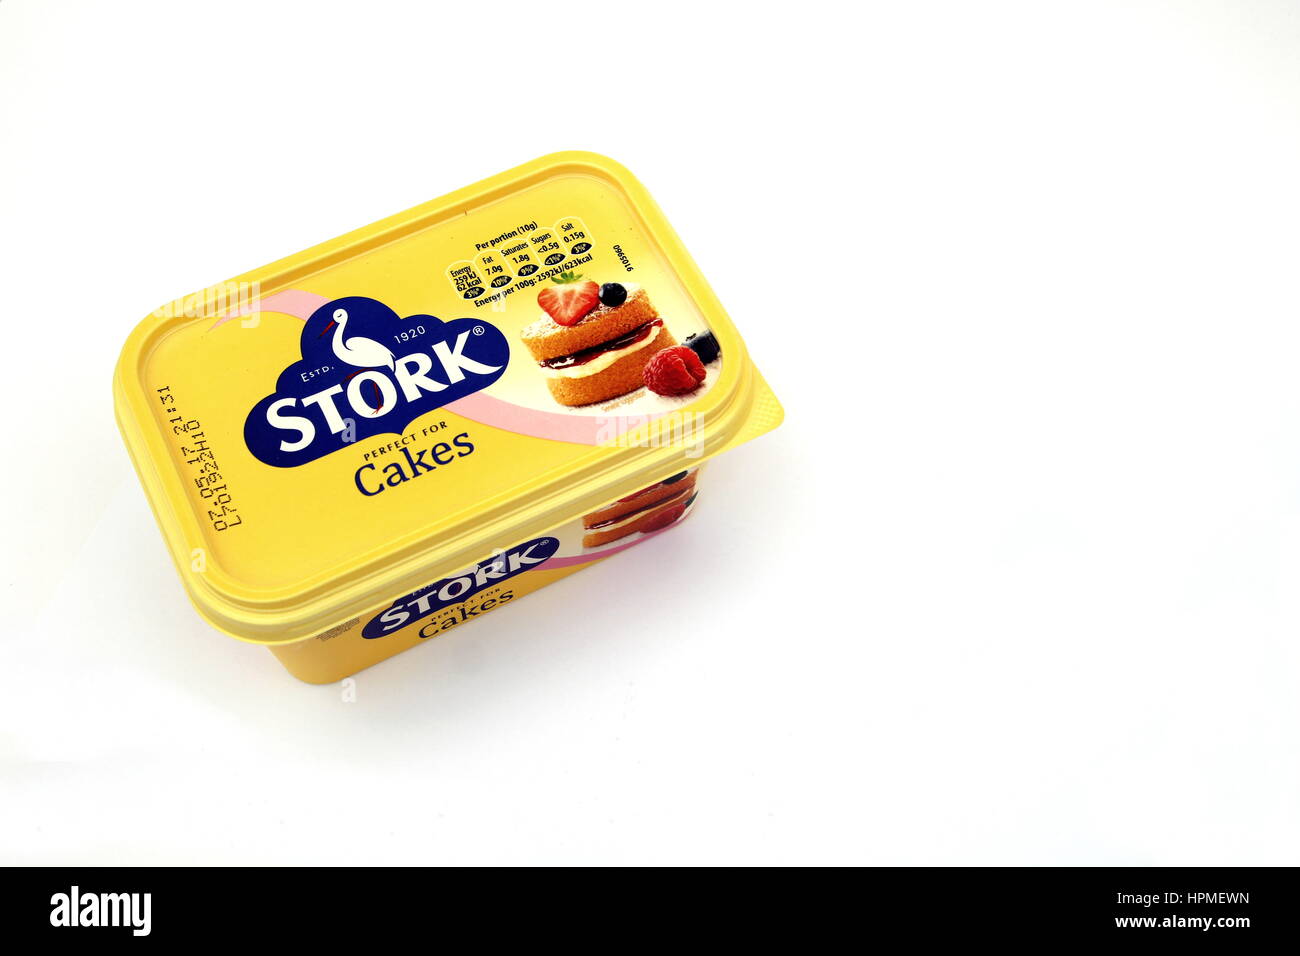 Camberley, UK - Feb 22nd 2017: Top view of a tub of Stork Cakes margarine, an iconic brand in the UK since 1920. White background Stock Photo